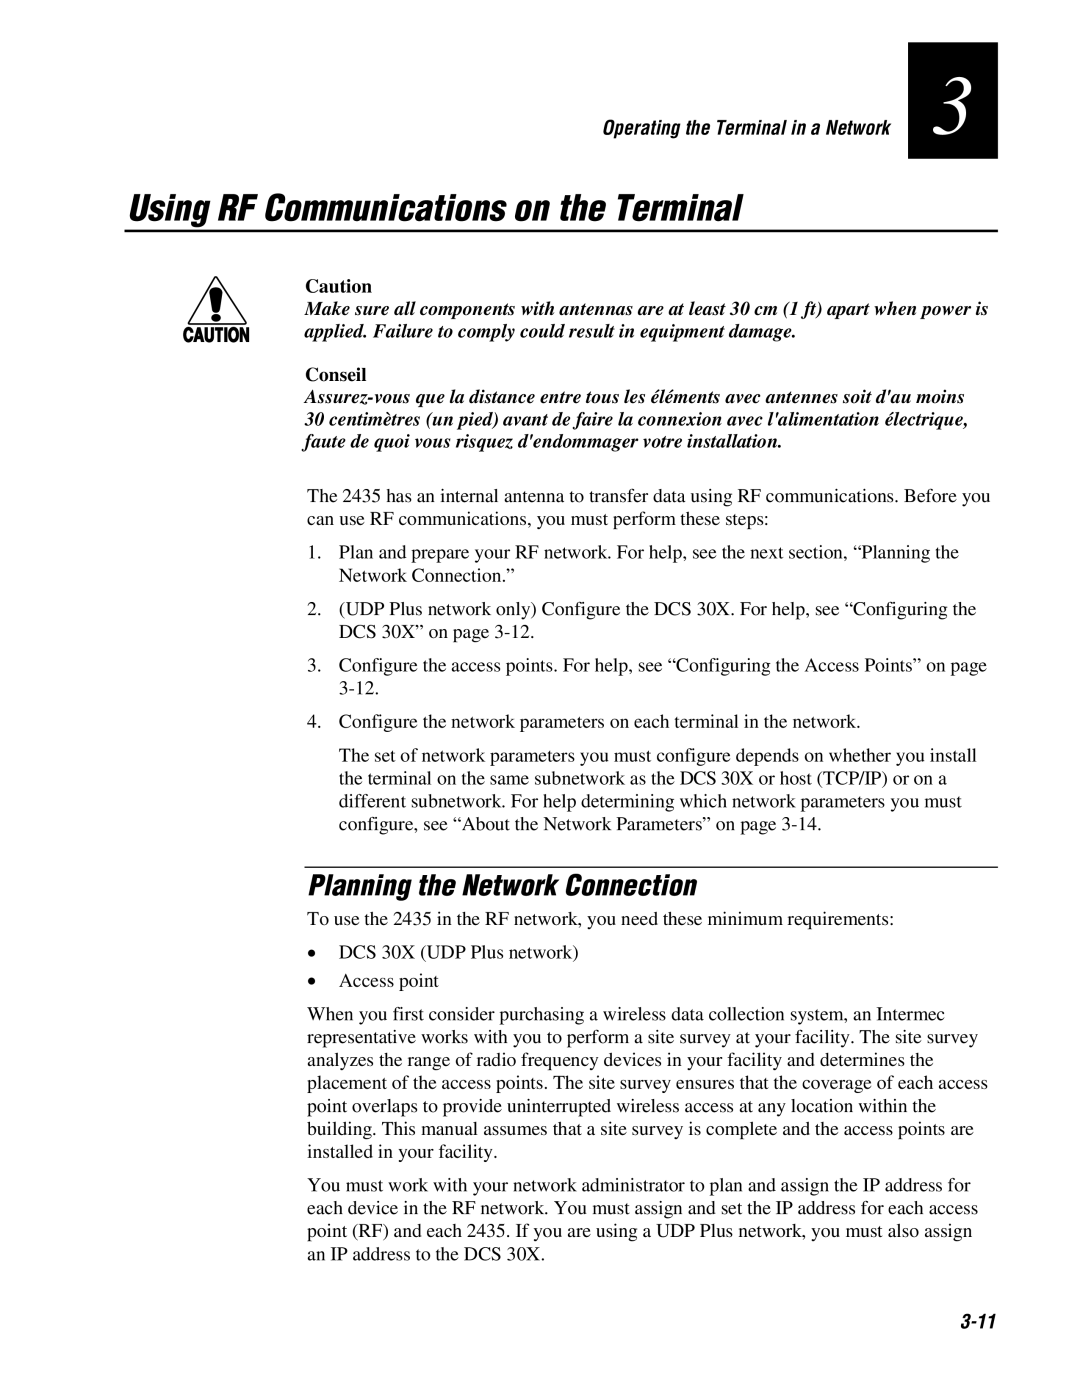 IBM 243X user manual Using RF Communications on the Terminal, Planning the Network Connection, 3-11, Conseil 